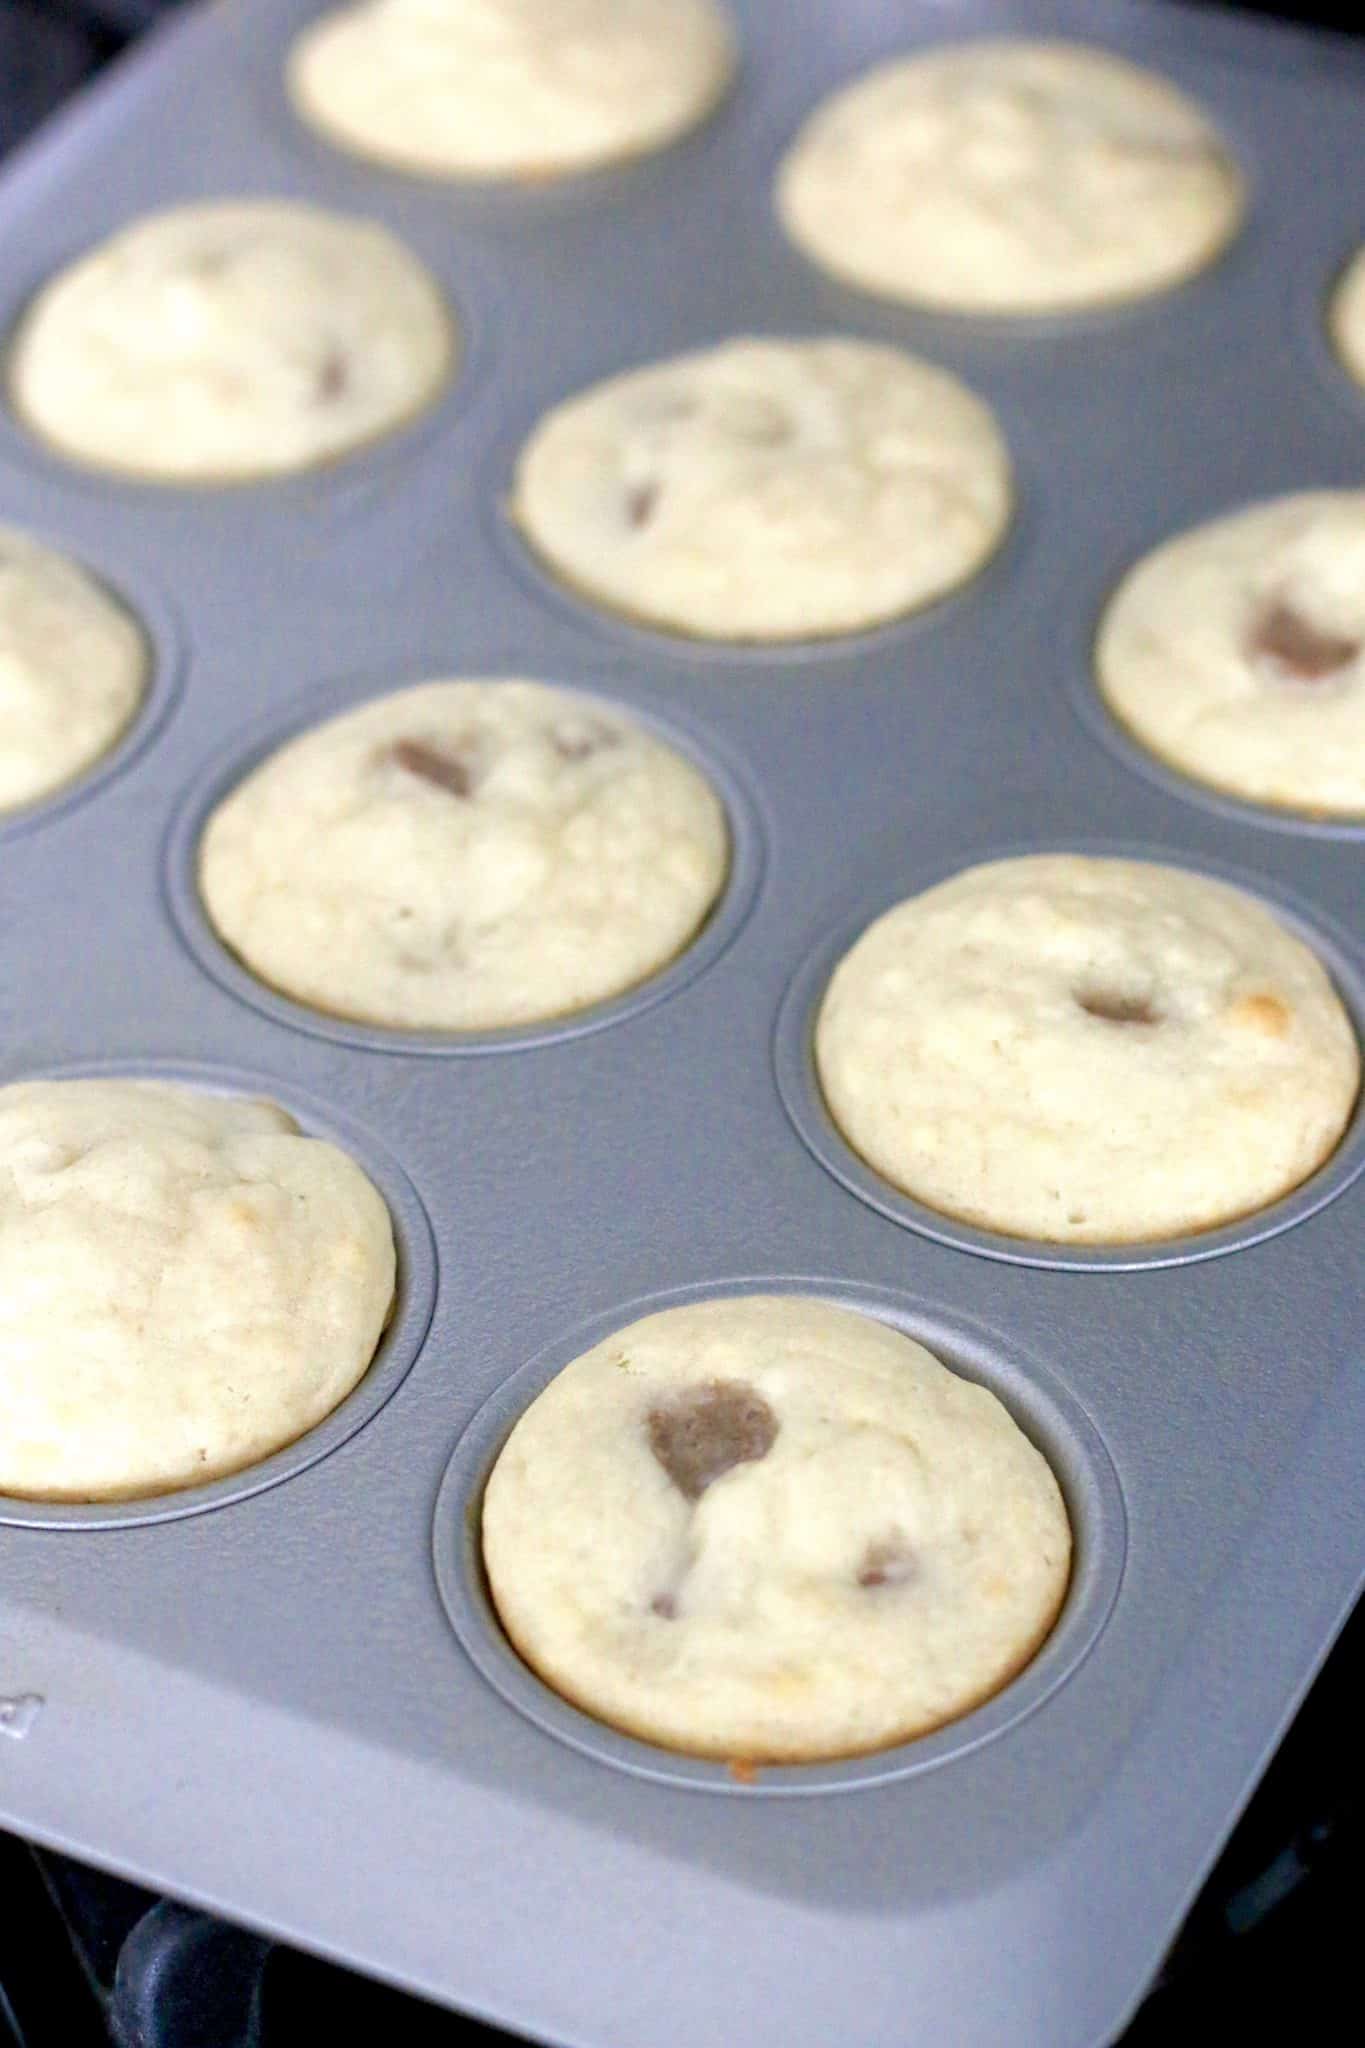 easy baked pancake and sausage muffins shown fully baked in a muffin pan.